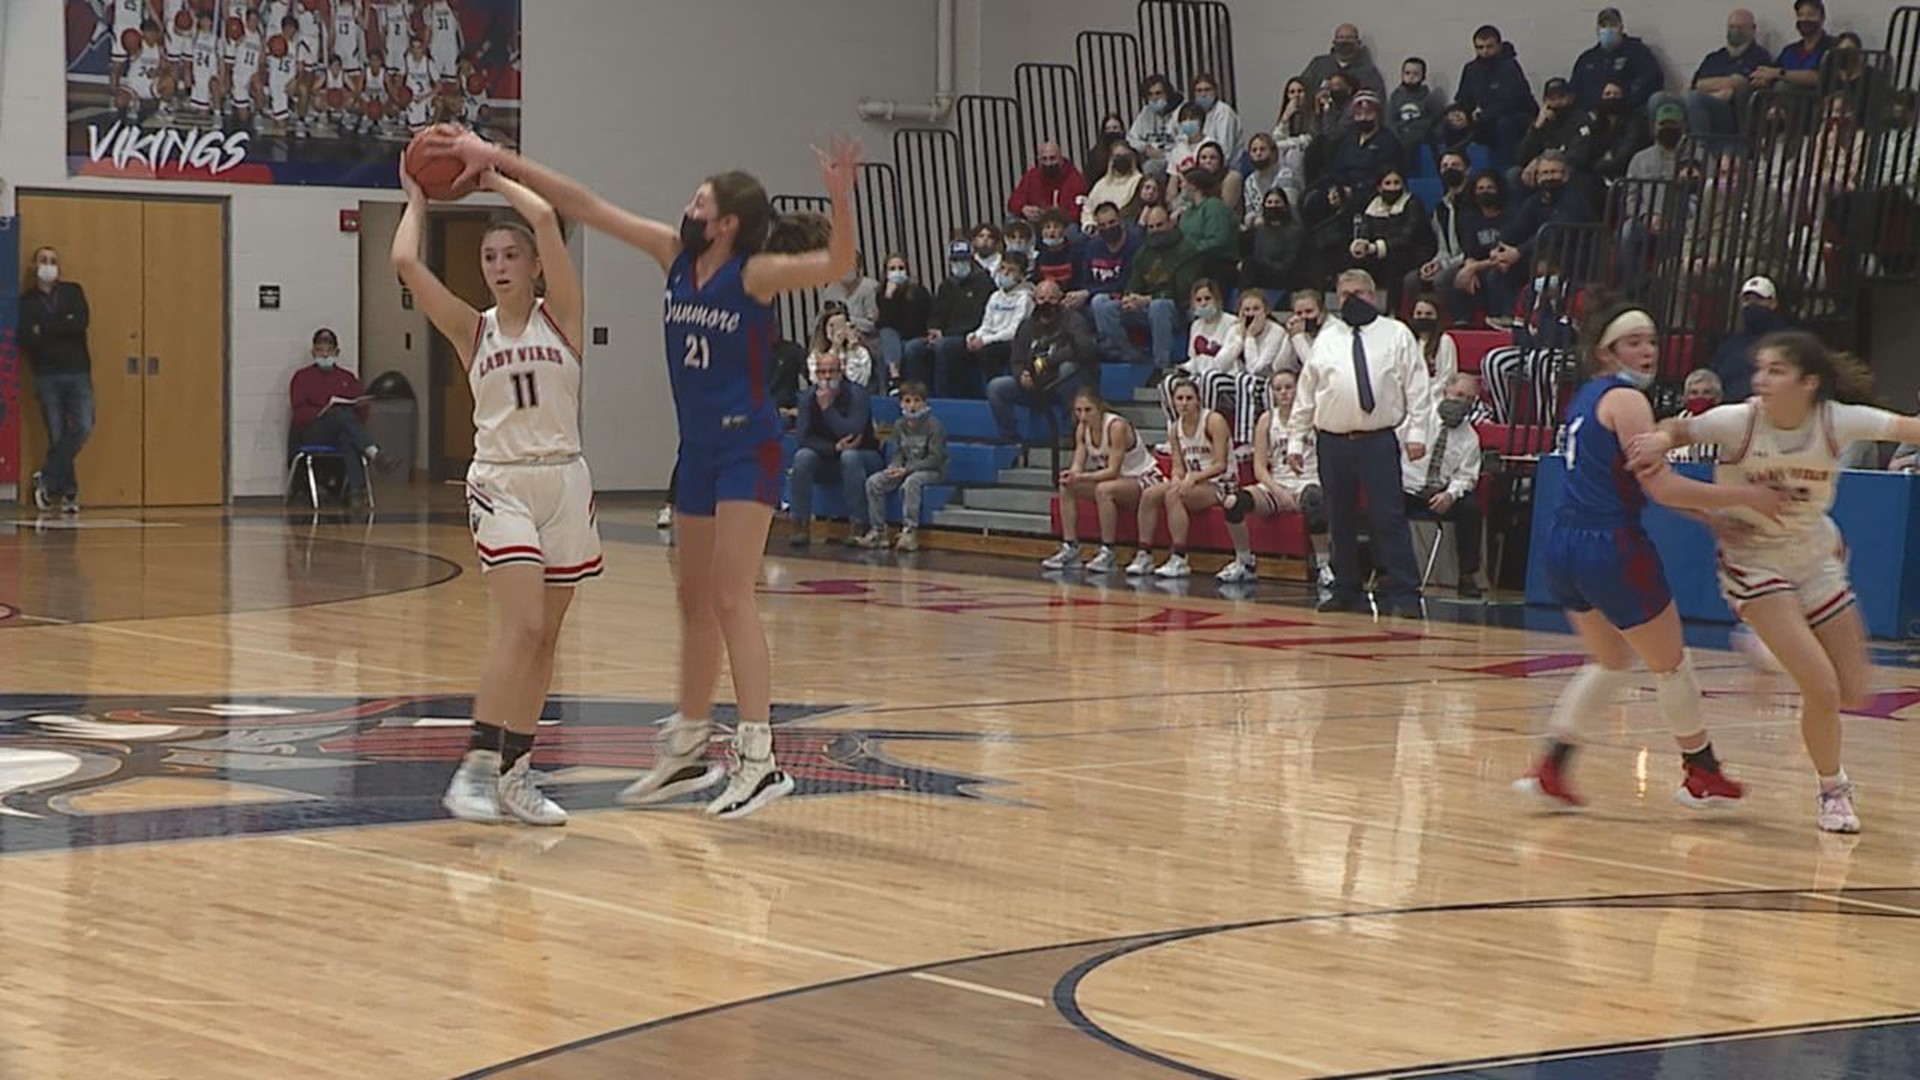 In A Battle of Top Teams, the Lady Bucks Ran Away From the Lady Vikes to Win the Super 16 Showdown